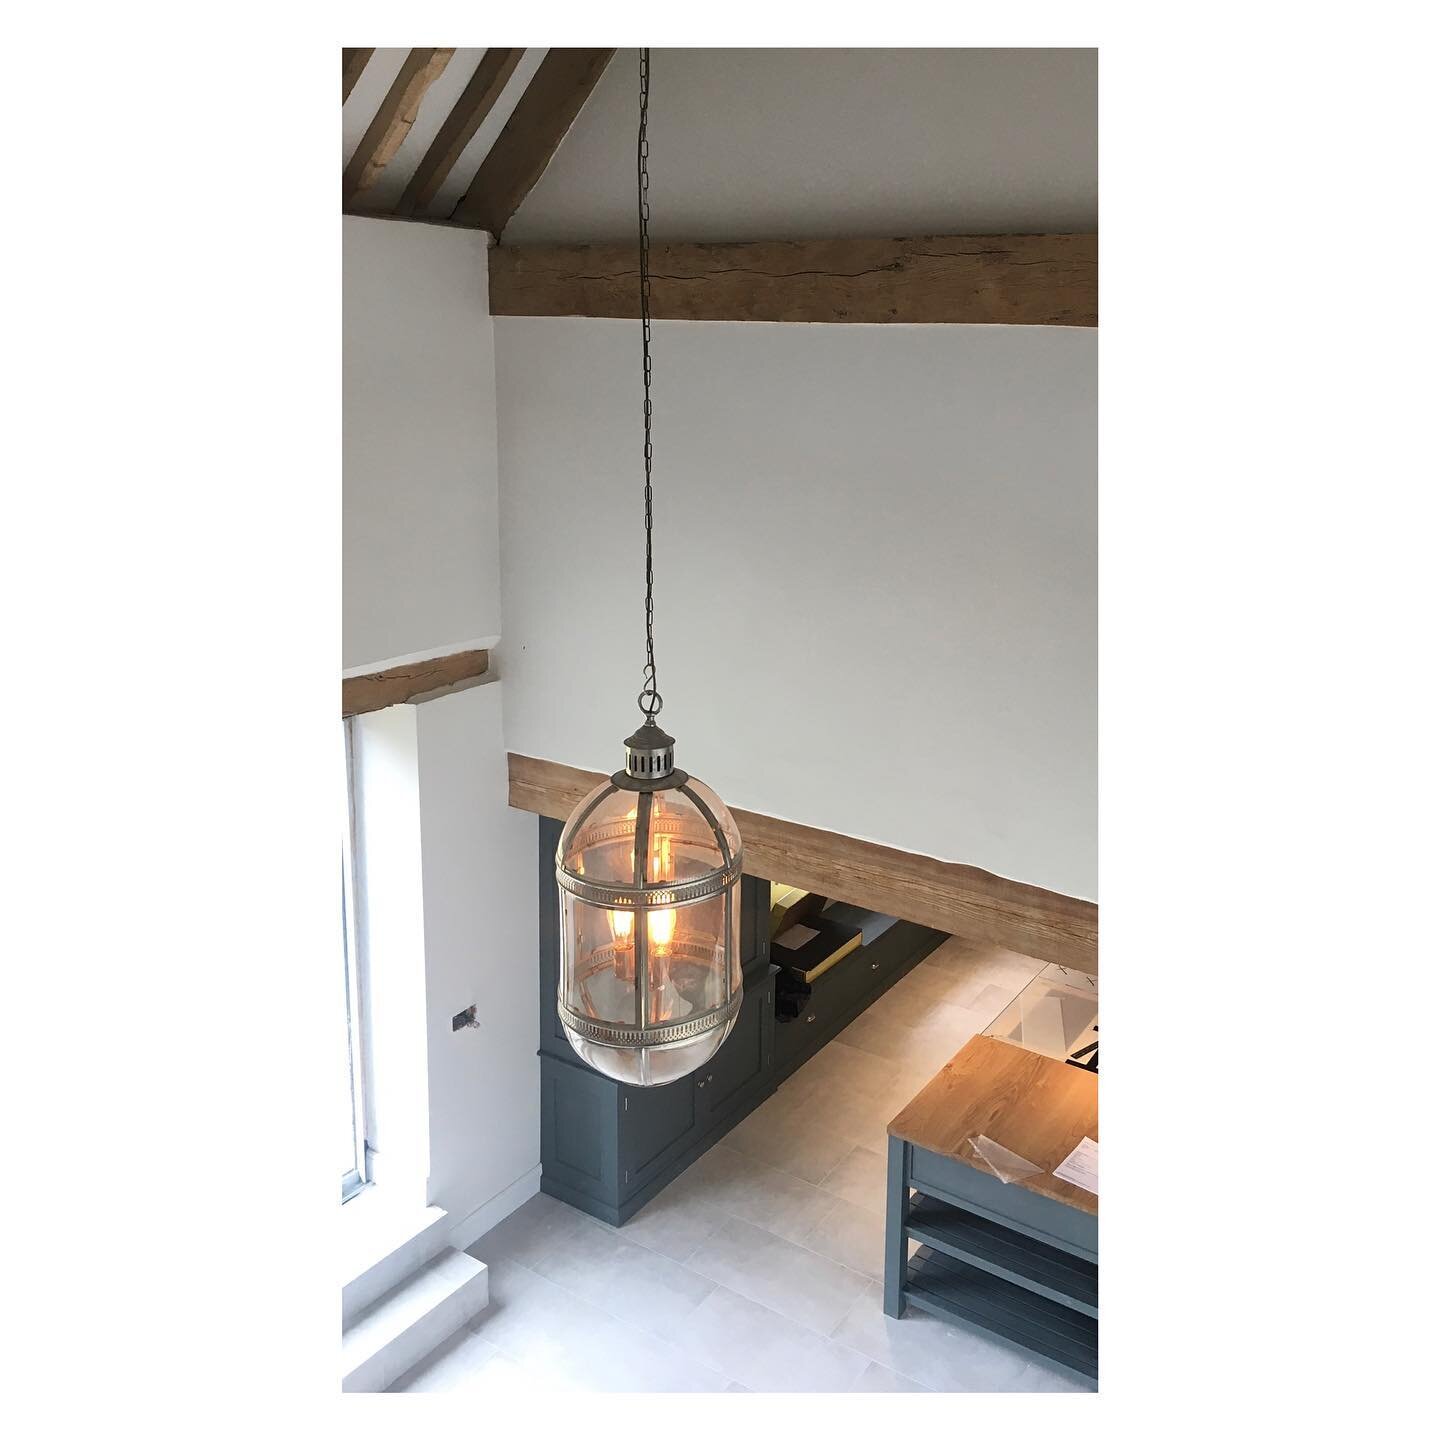 A little snap taken from the gallery at our Old Watermill project during installation. Such a lovely old building and space
.
.
.
.
#bespokekitchen #oxfordshire #interiordesigner #kitchendesign